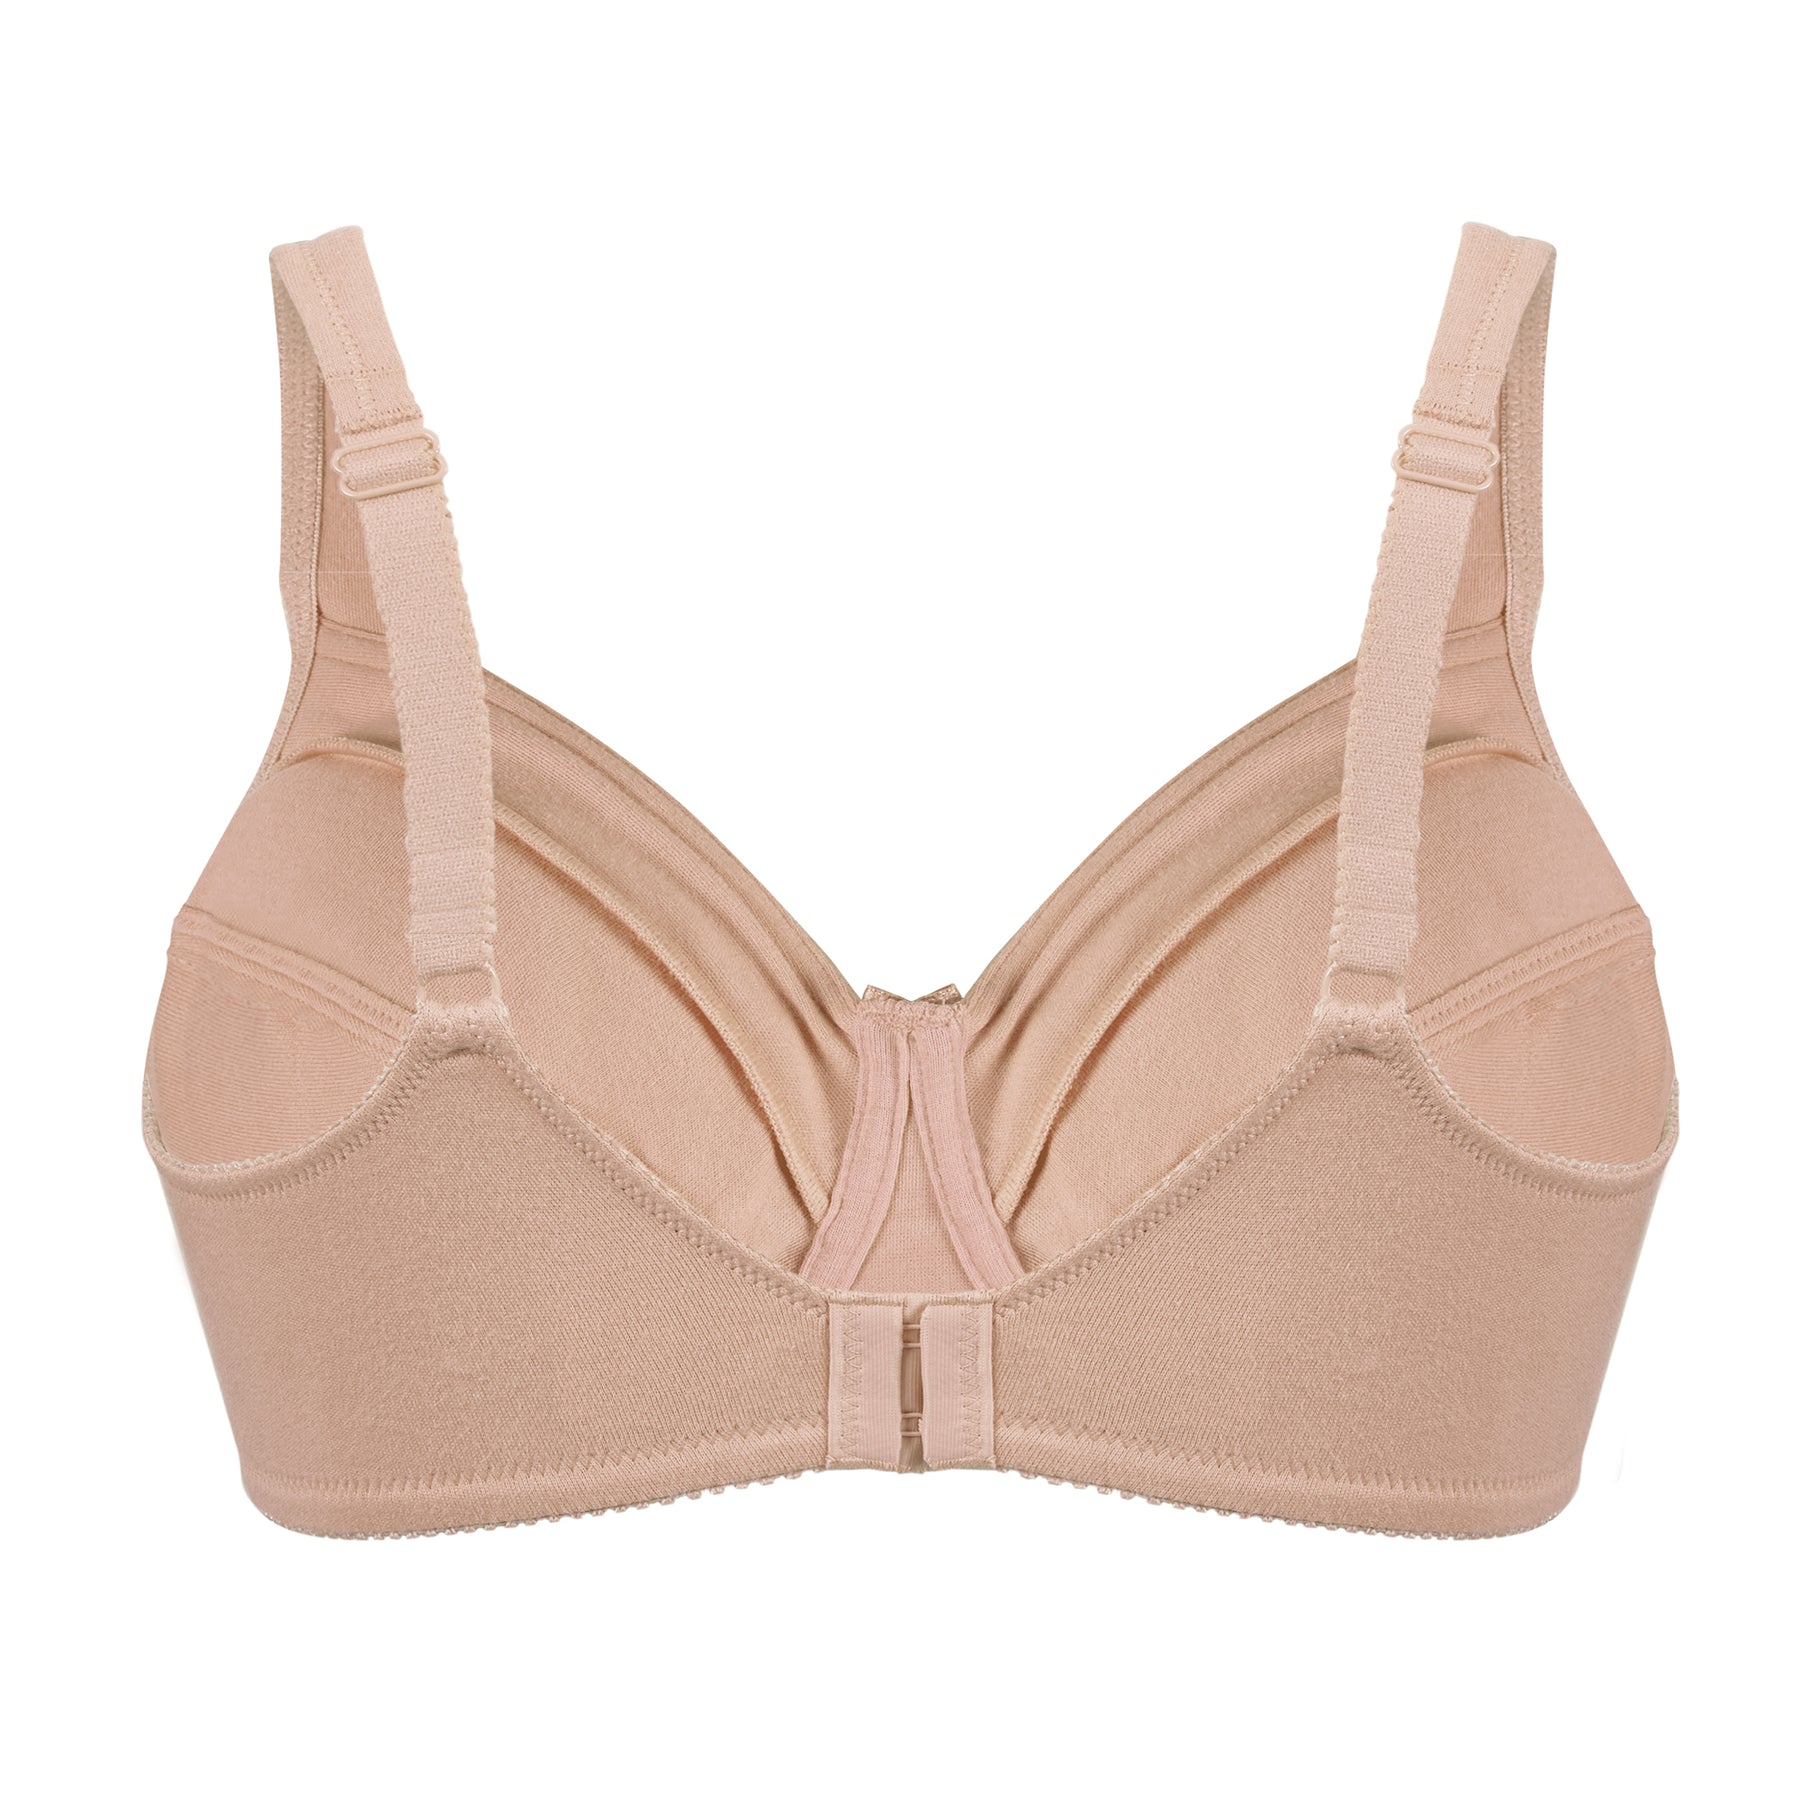 Get the Best Deals on Alisa Molded Cotton Bras by Trylo - Order